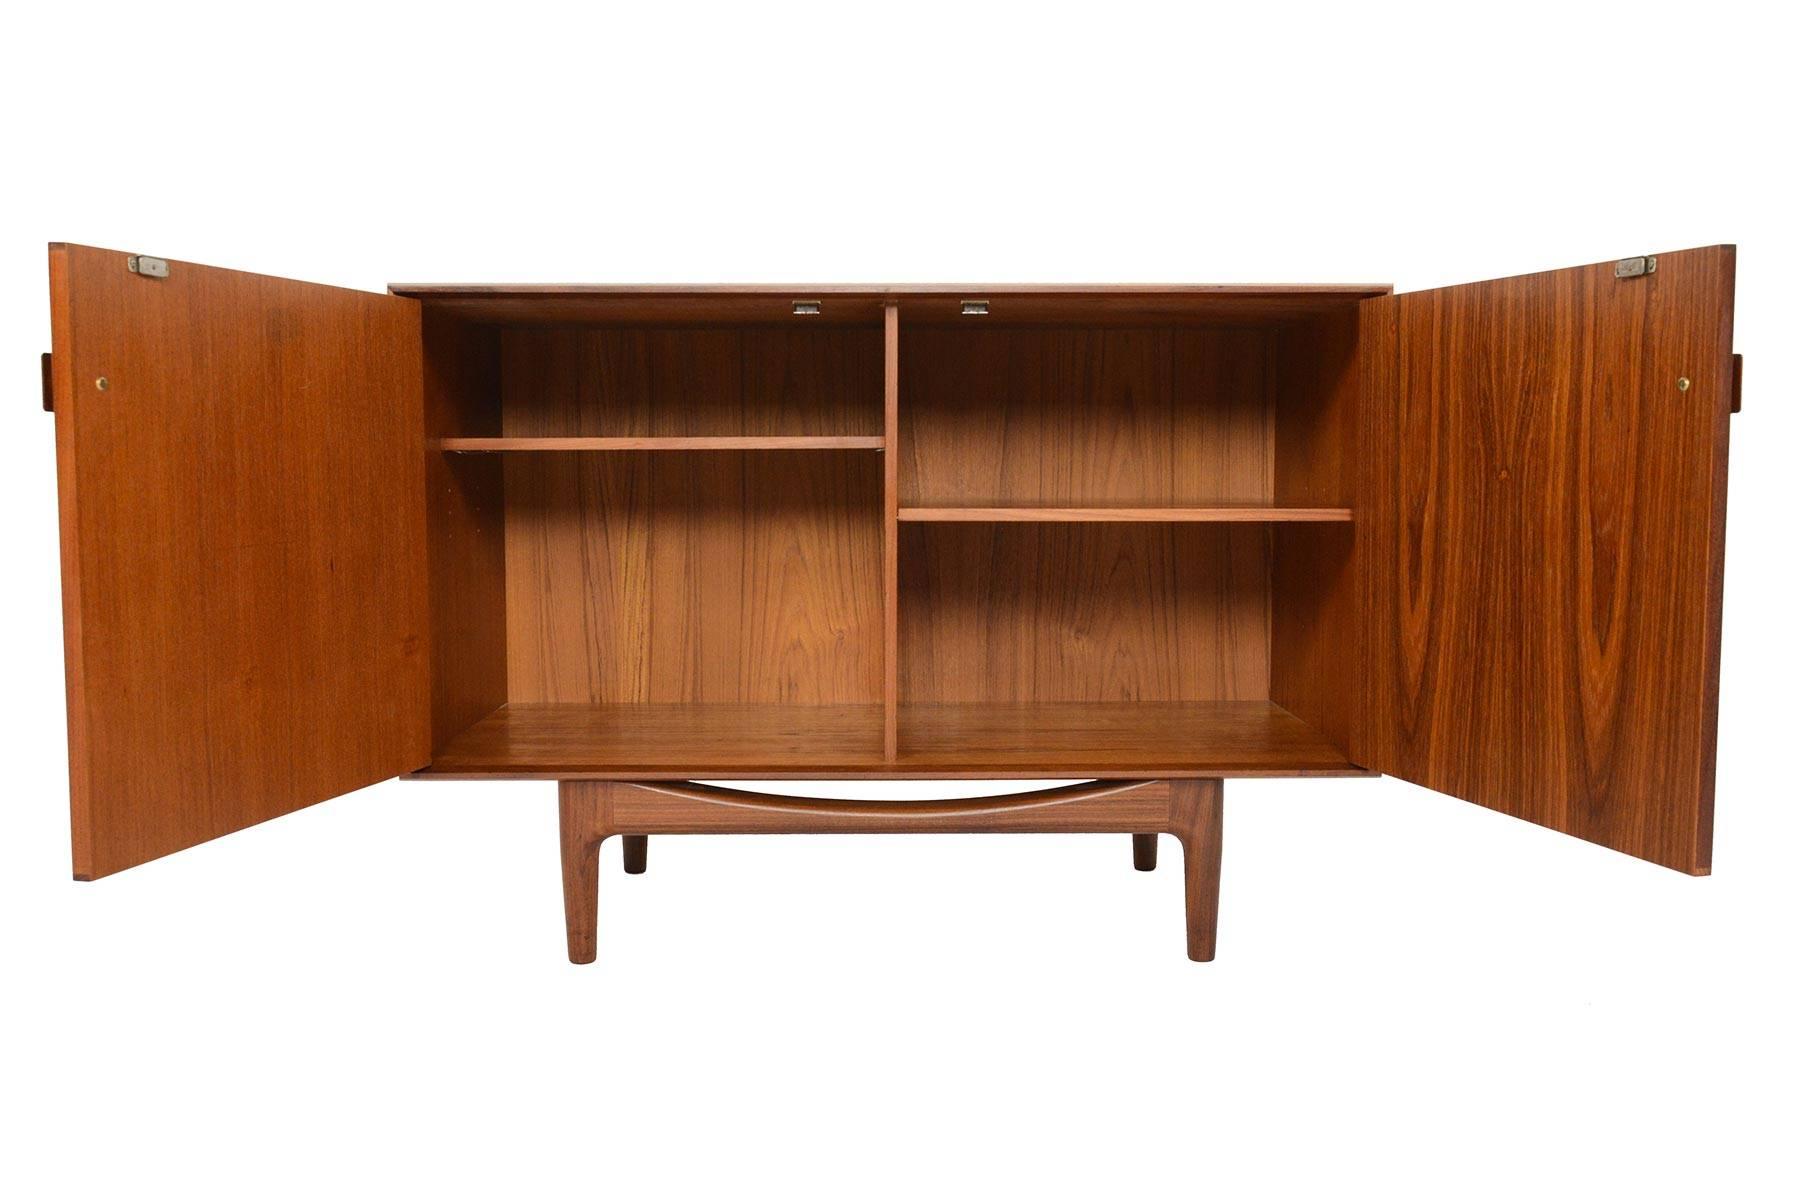 This small midcentury teak credenza was designed by Ib Kofod-Larsen for G Plan in 1961 for the Danish Range. Crafted in teak and afrormosia with handsomely refined lines, two wide doors open to reveal two bays with adjustable shelving. Finished on